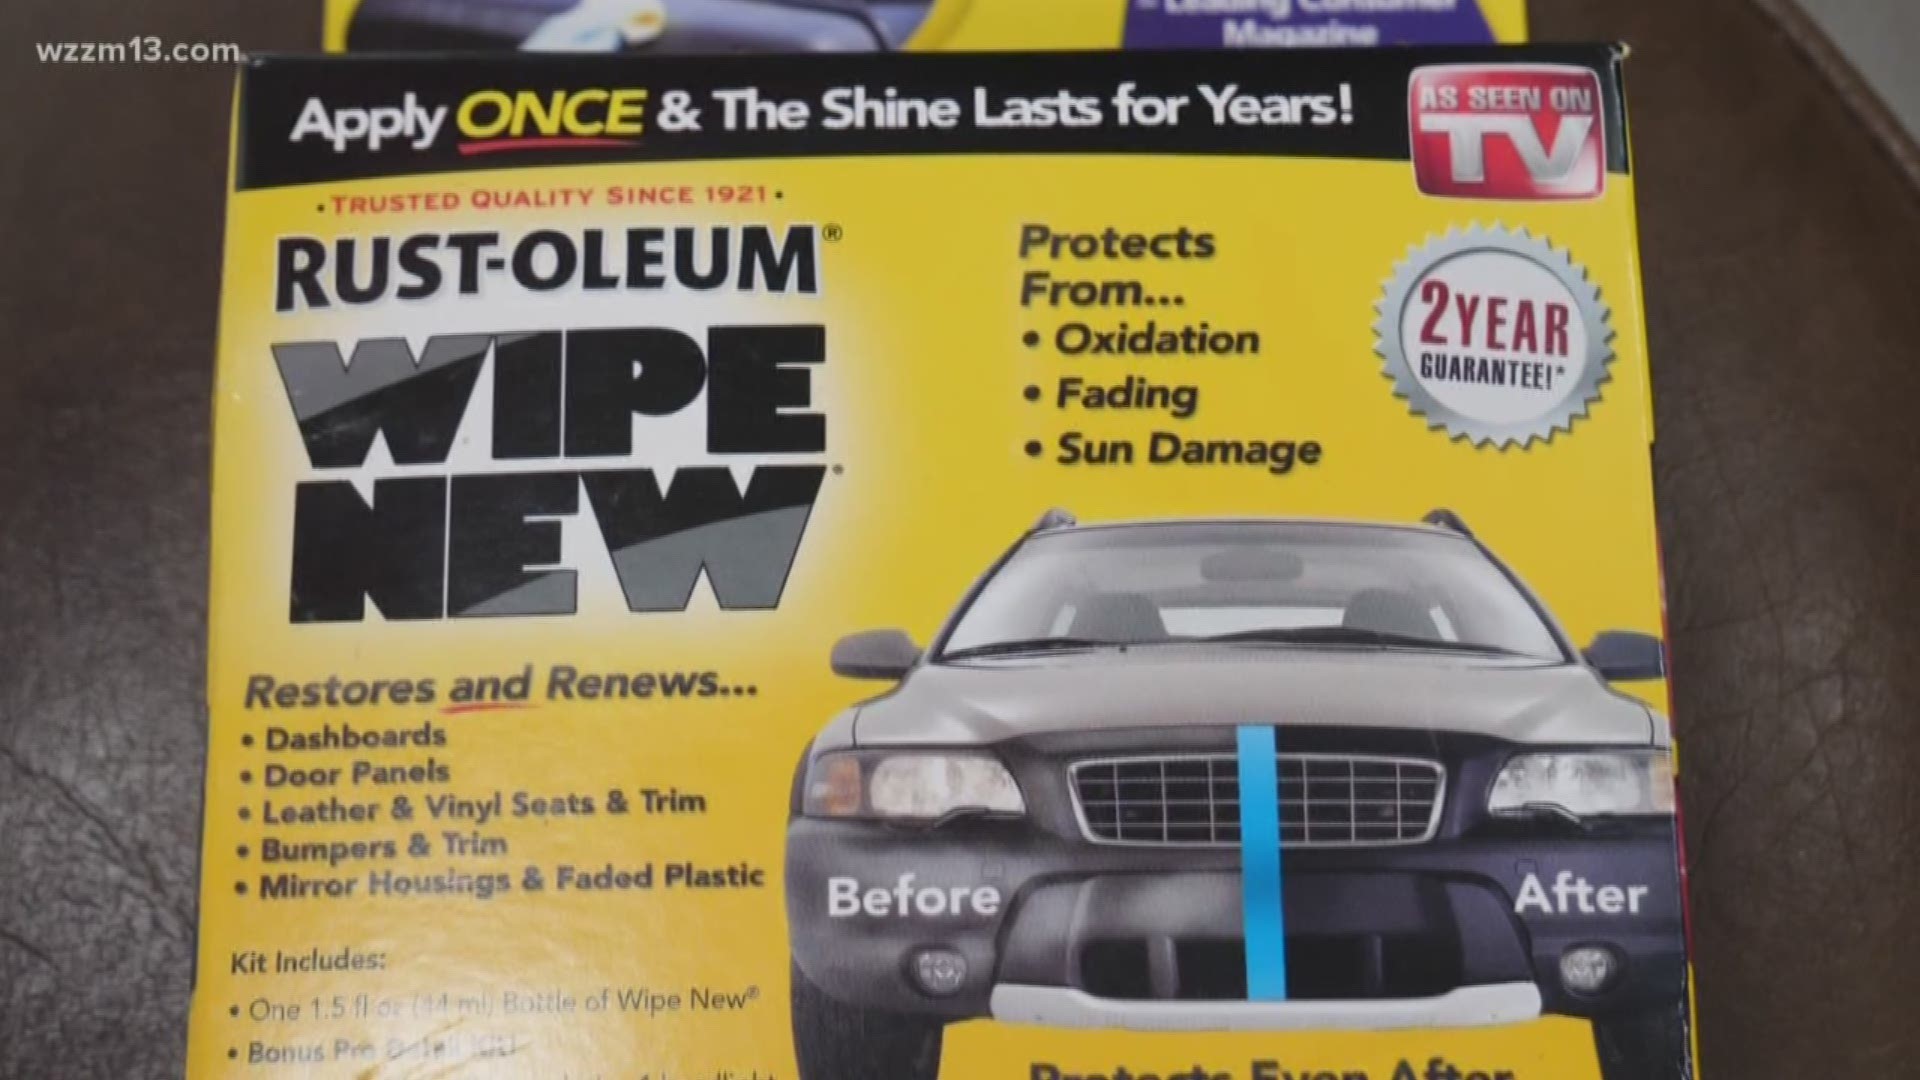 Try It Before You Buy It: Wipe New